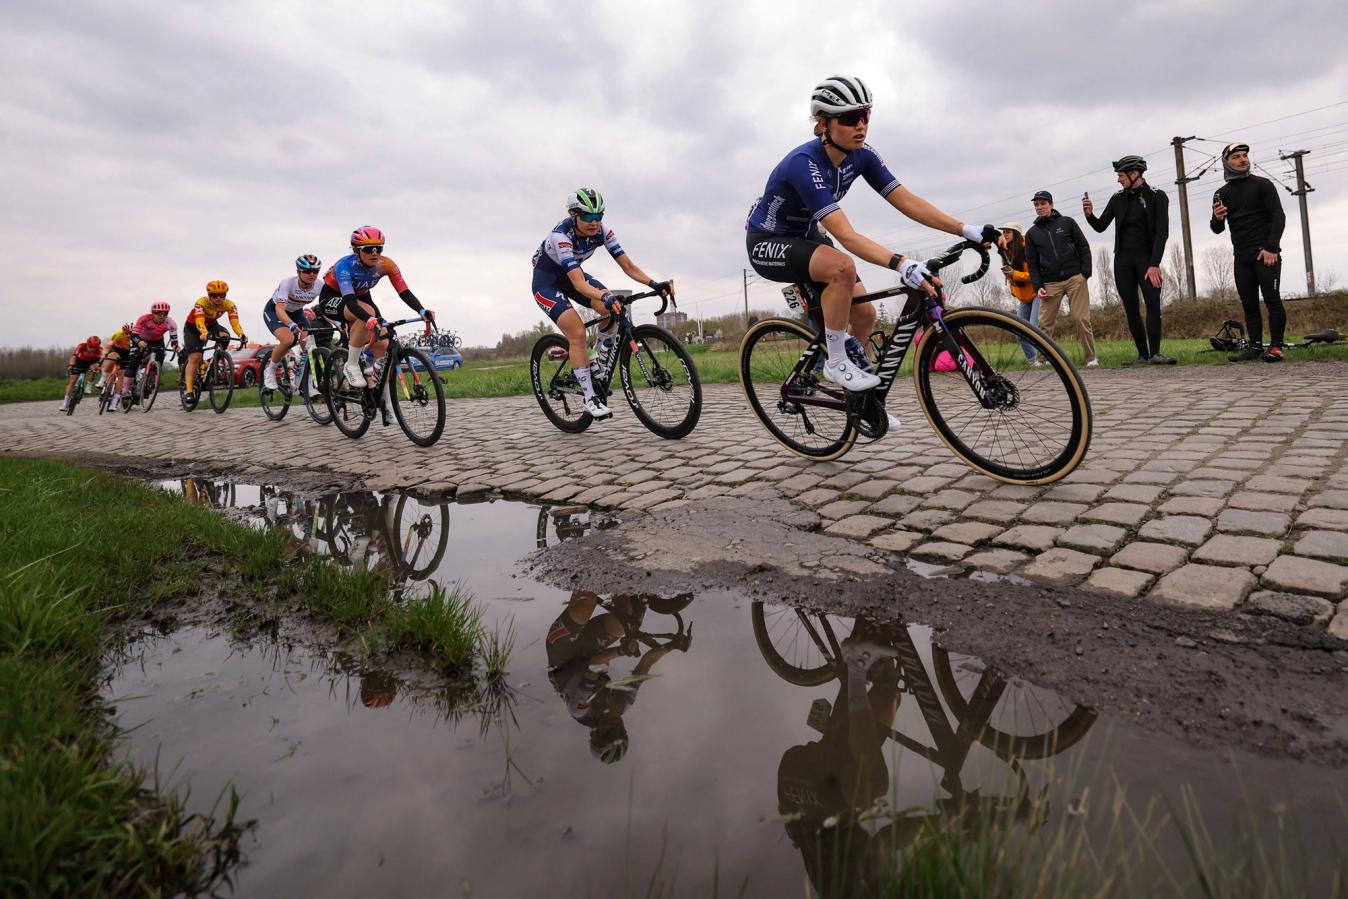 The longest sector of cobbles in the race